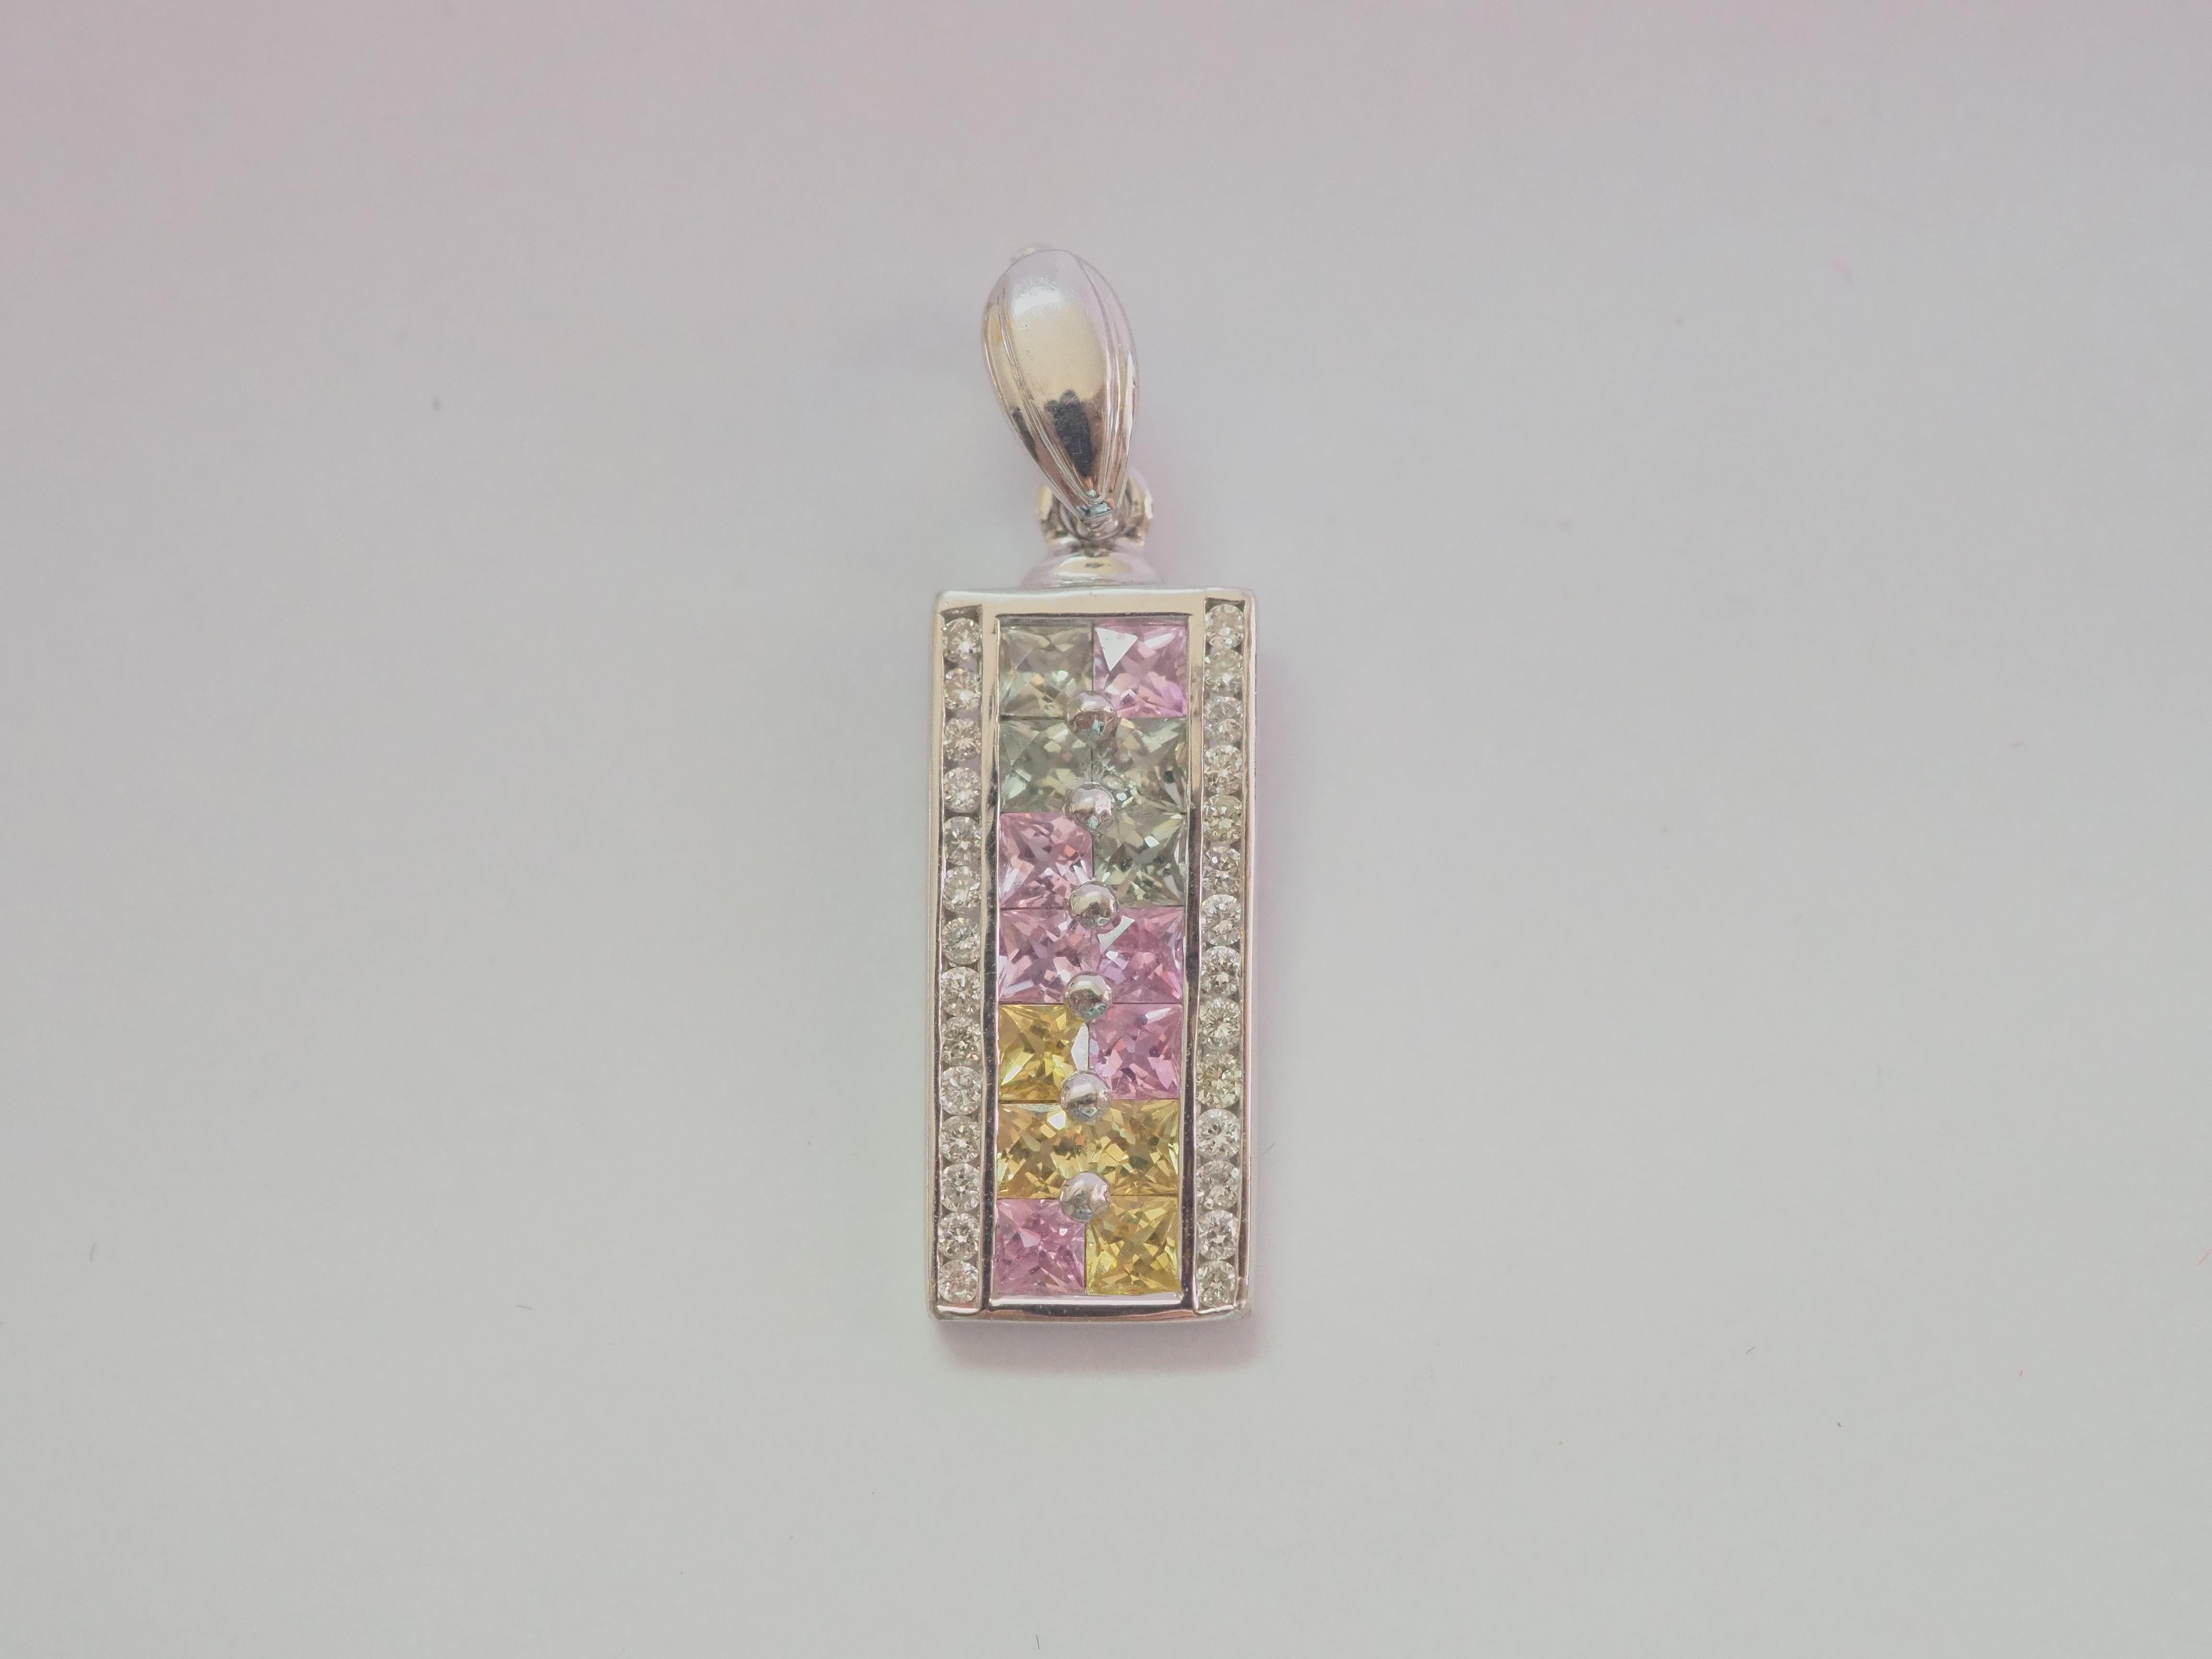 Auction Estimate:
$325 - $1,500

A very beautiful and delicate bar shaped pendant in 18K solid white gold for fashion wearing every day and everywhere. The pendant includes a total 14 squared fancy pastel sapphires and arranged and inlaid